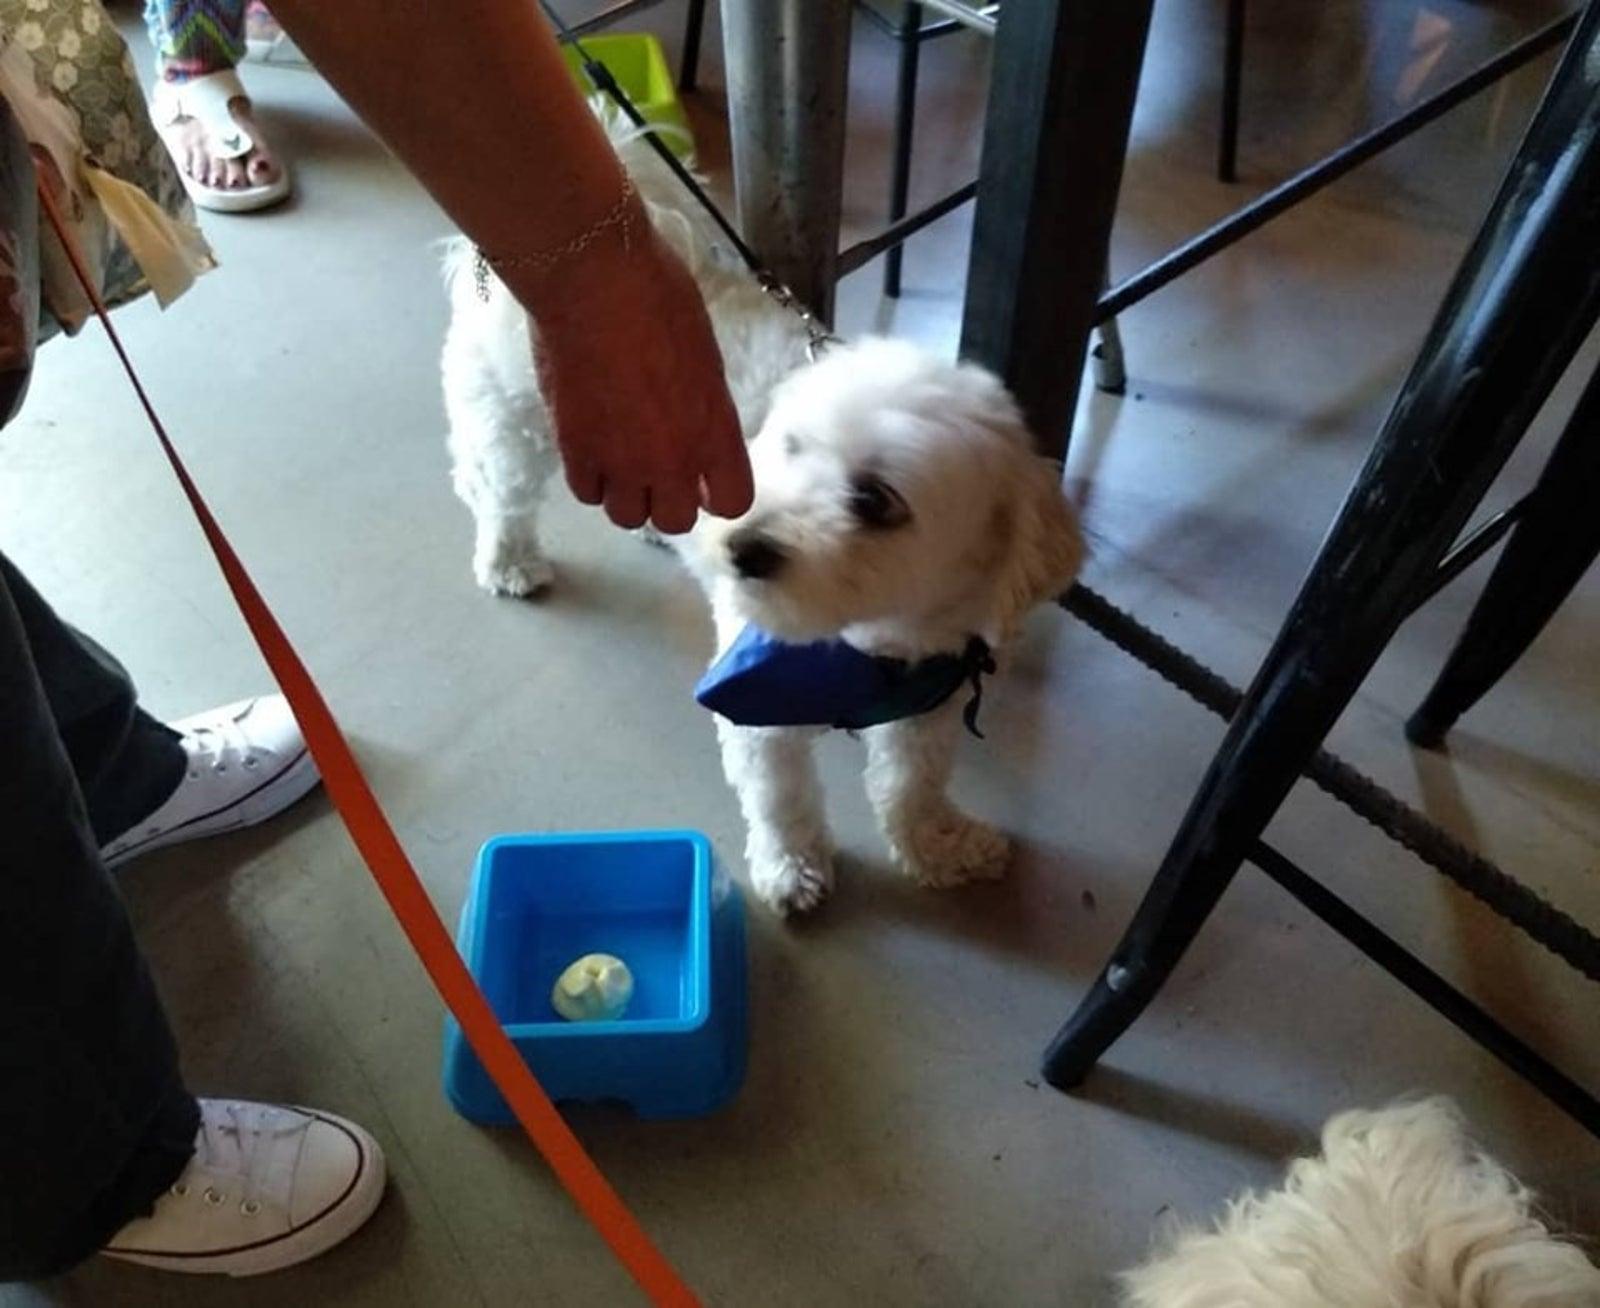 Pet Friendly Ice Cream Tasting for Humans and Dogs